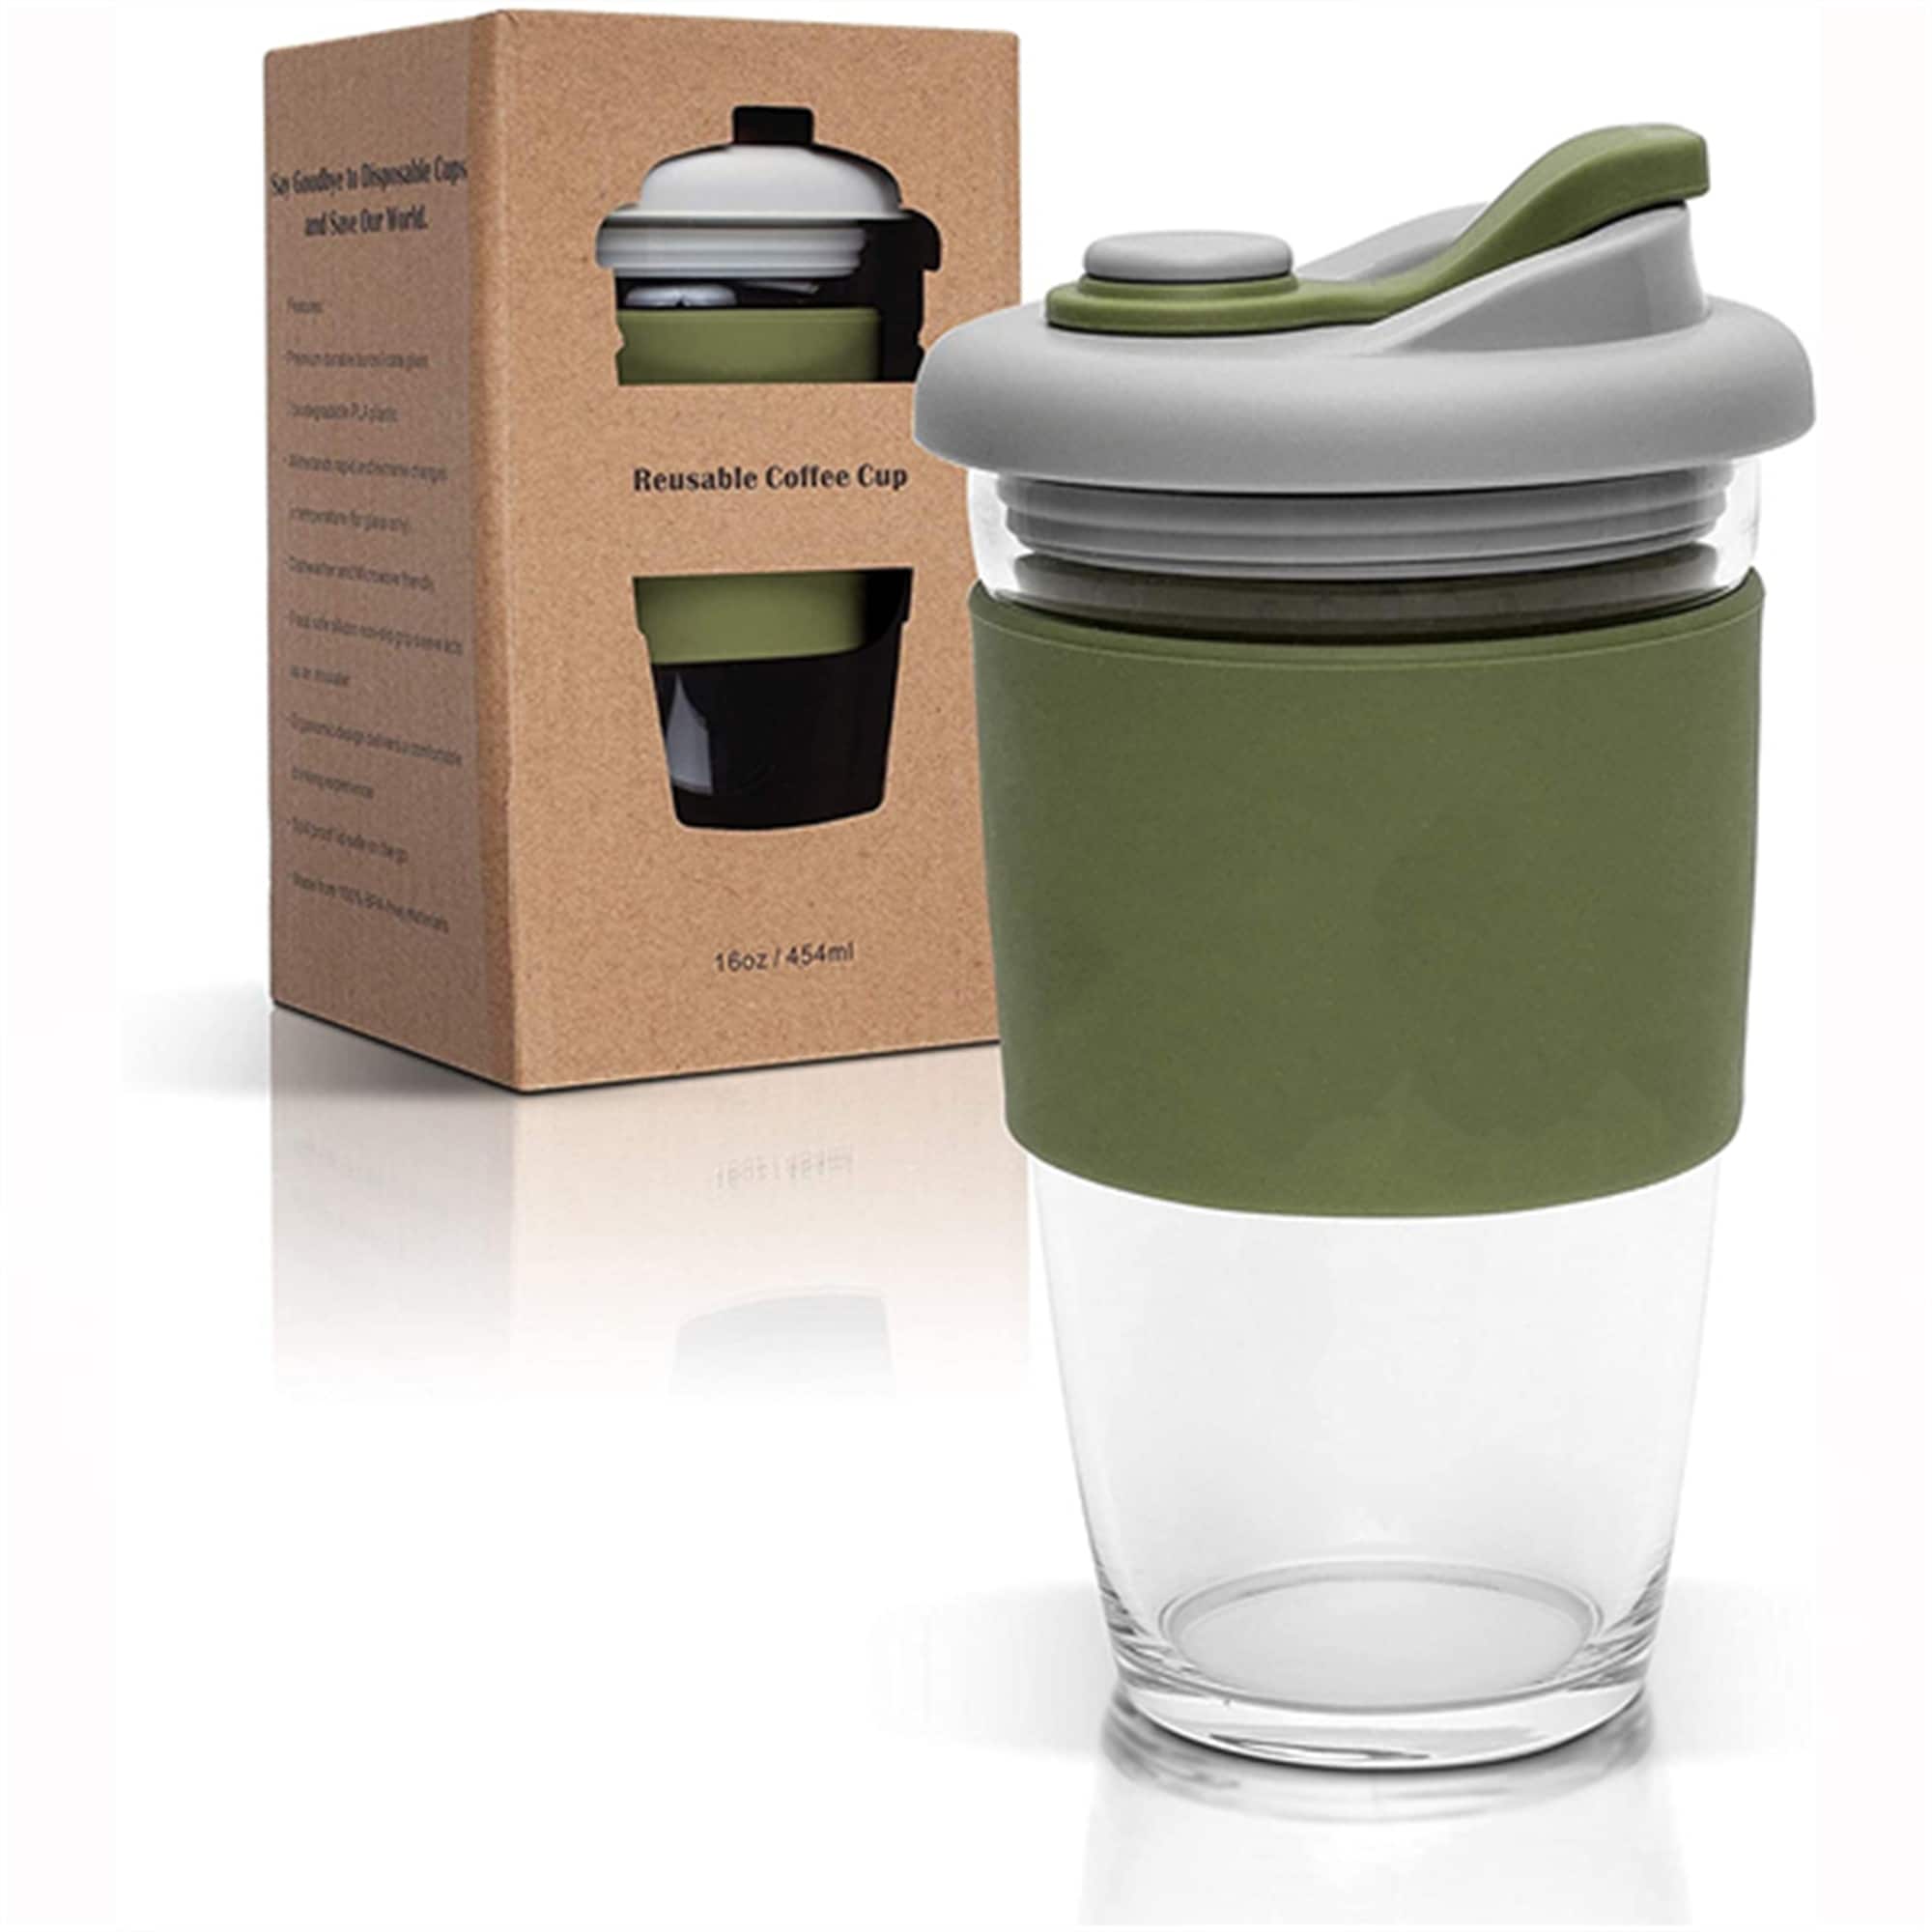 The Reusable Glass Coffee Cup, ToGo Travel Coffee Mug with Lid and Silicone  Sleeve, Dishwasher and Microwave Safe - Bed Bath & Beyond - 33690868